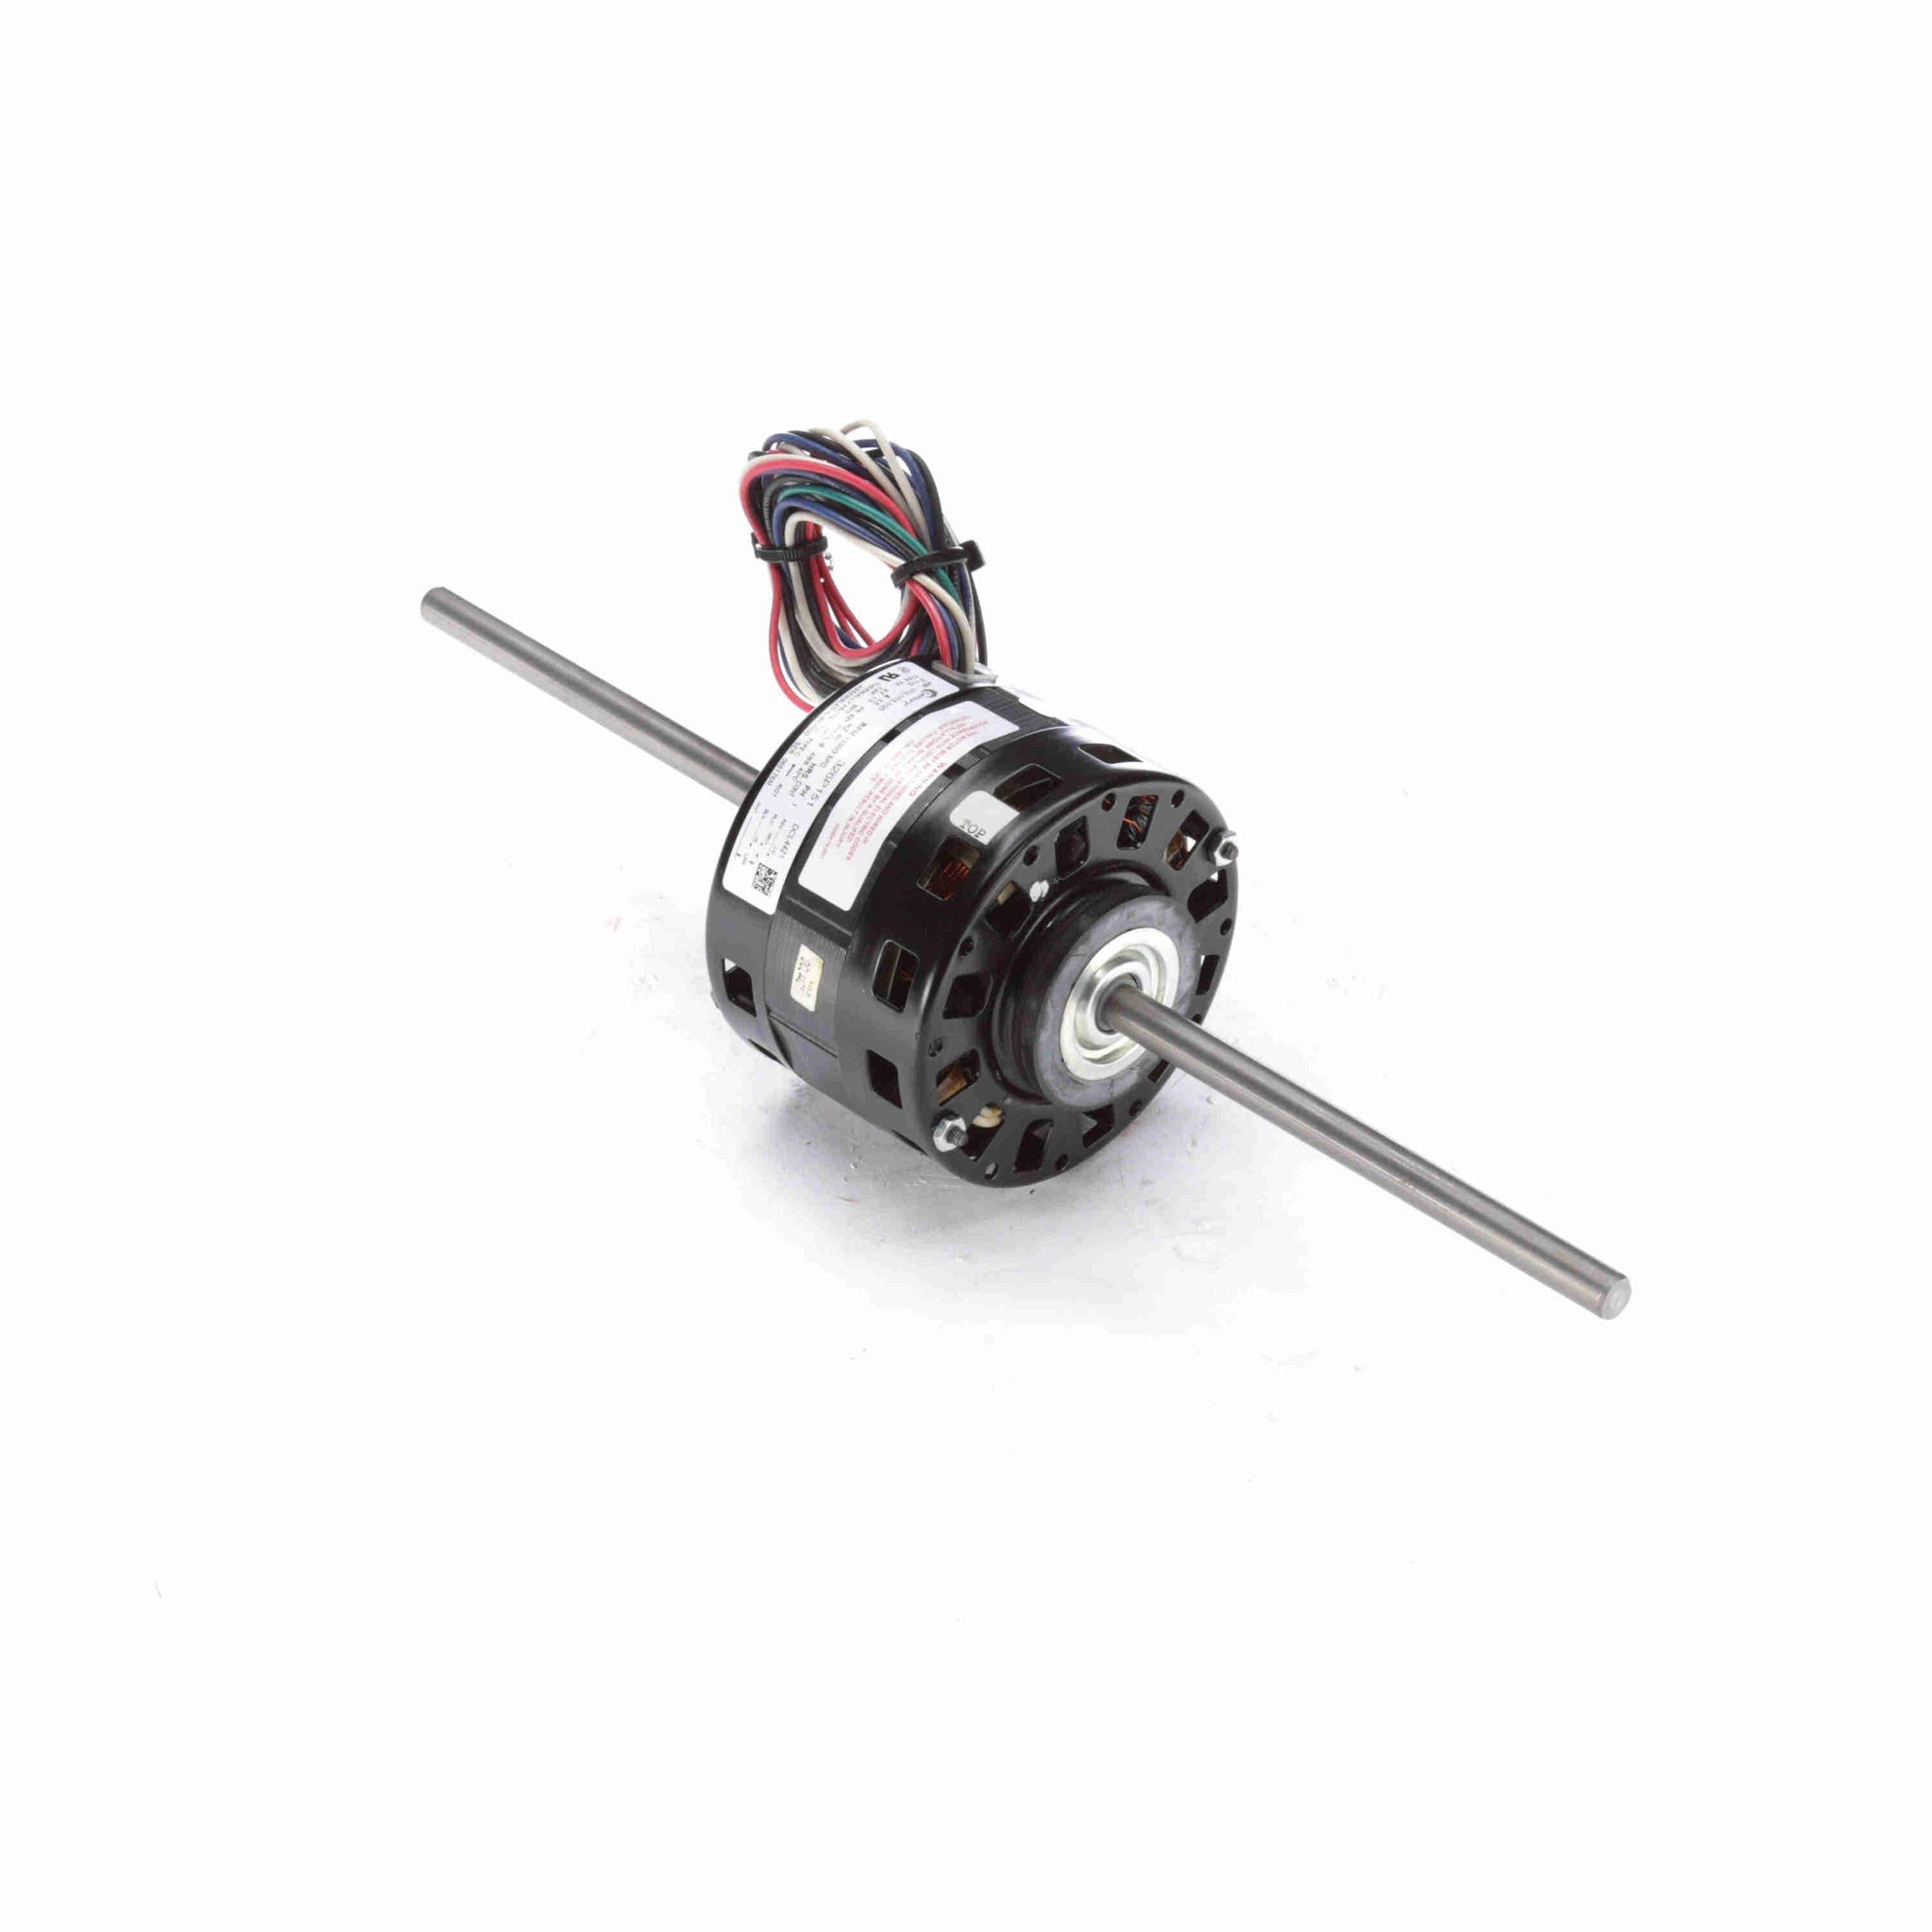 DCL4421 - 1/10-1/15-1/25 HP Fan Coil / Room Air Conditioner Motor, 1550 RPM, 3 Speed, 115 Volts, 42 Frame, OAO - Hardware & Moreee